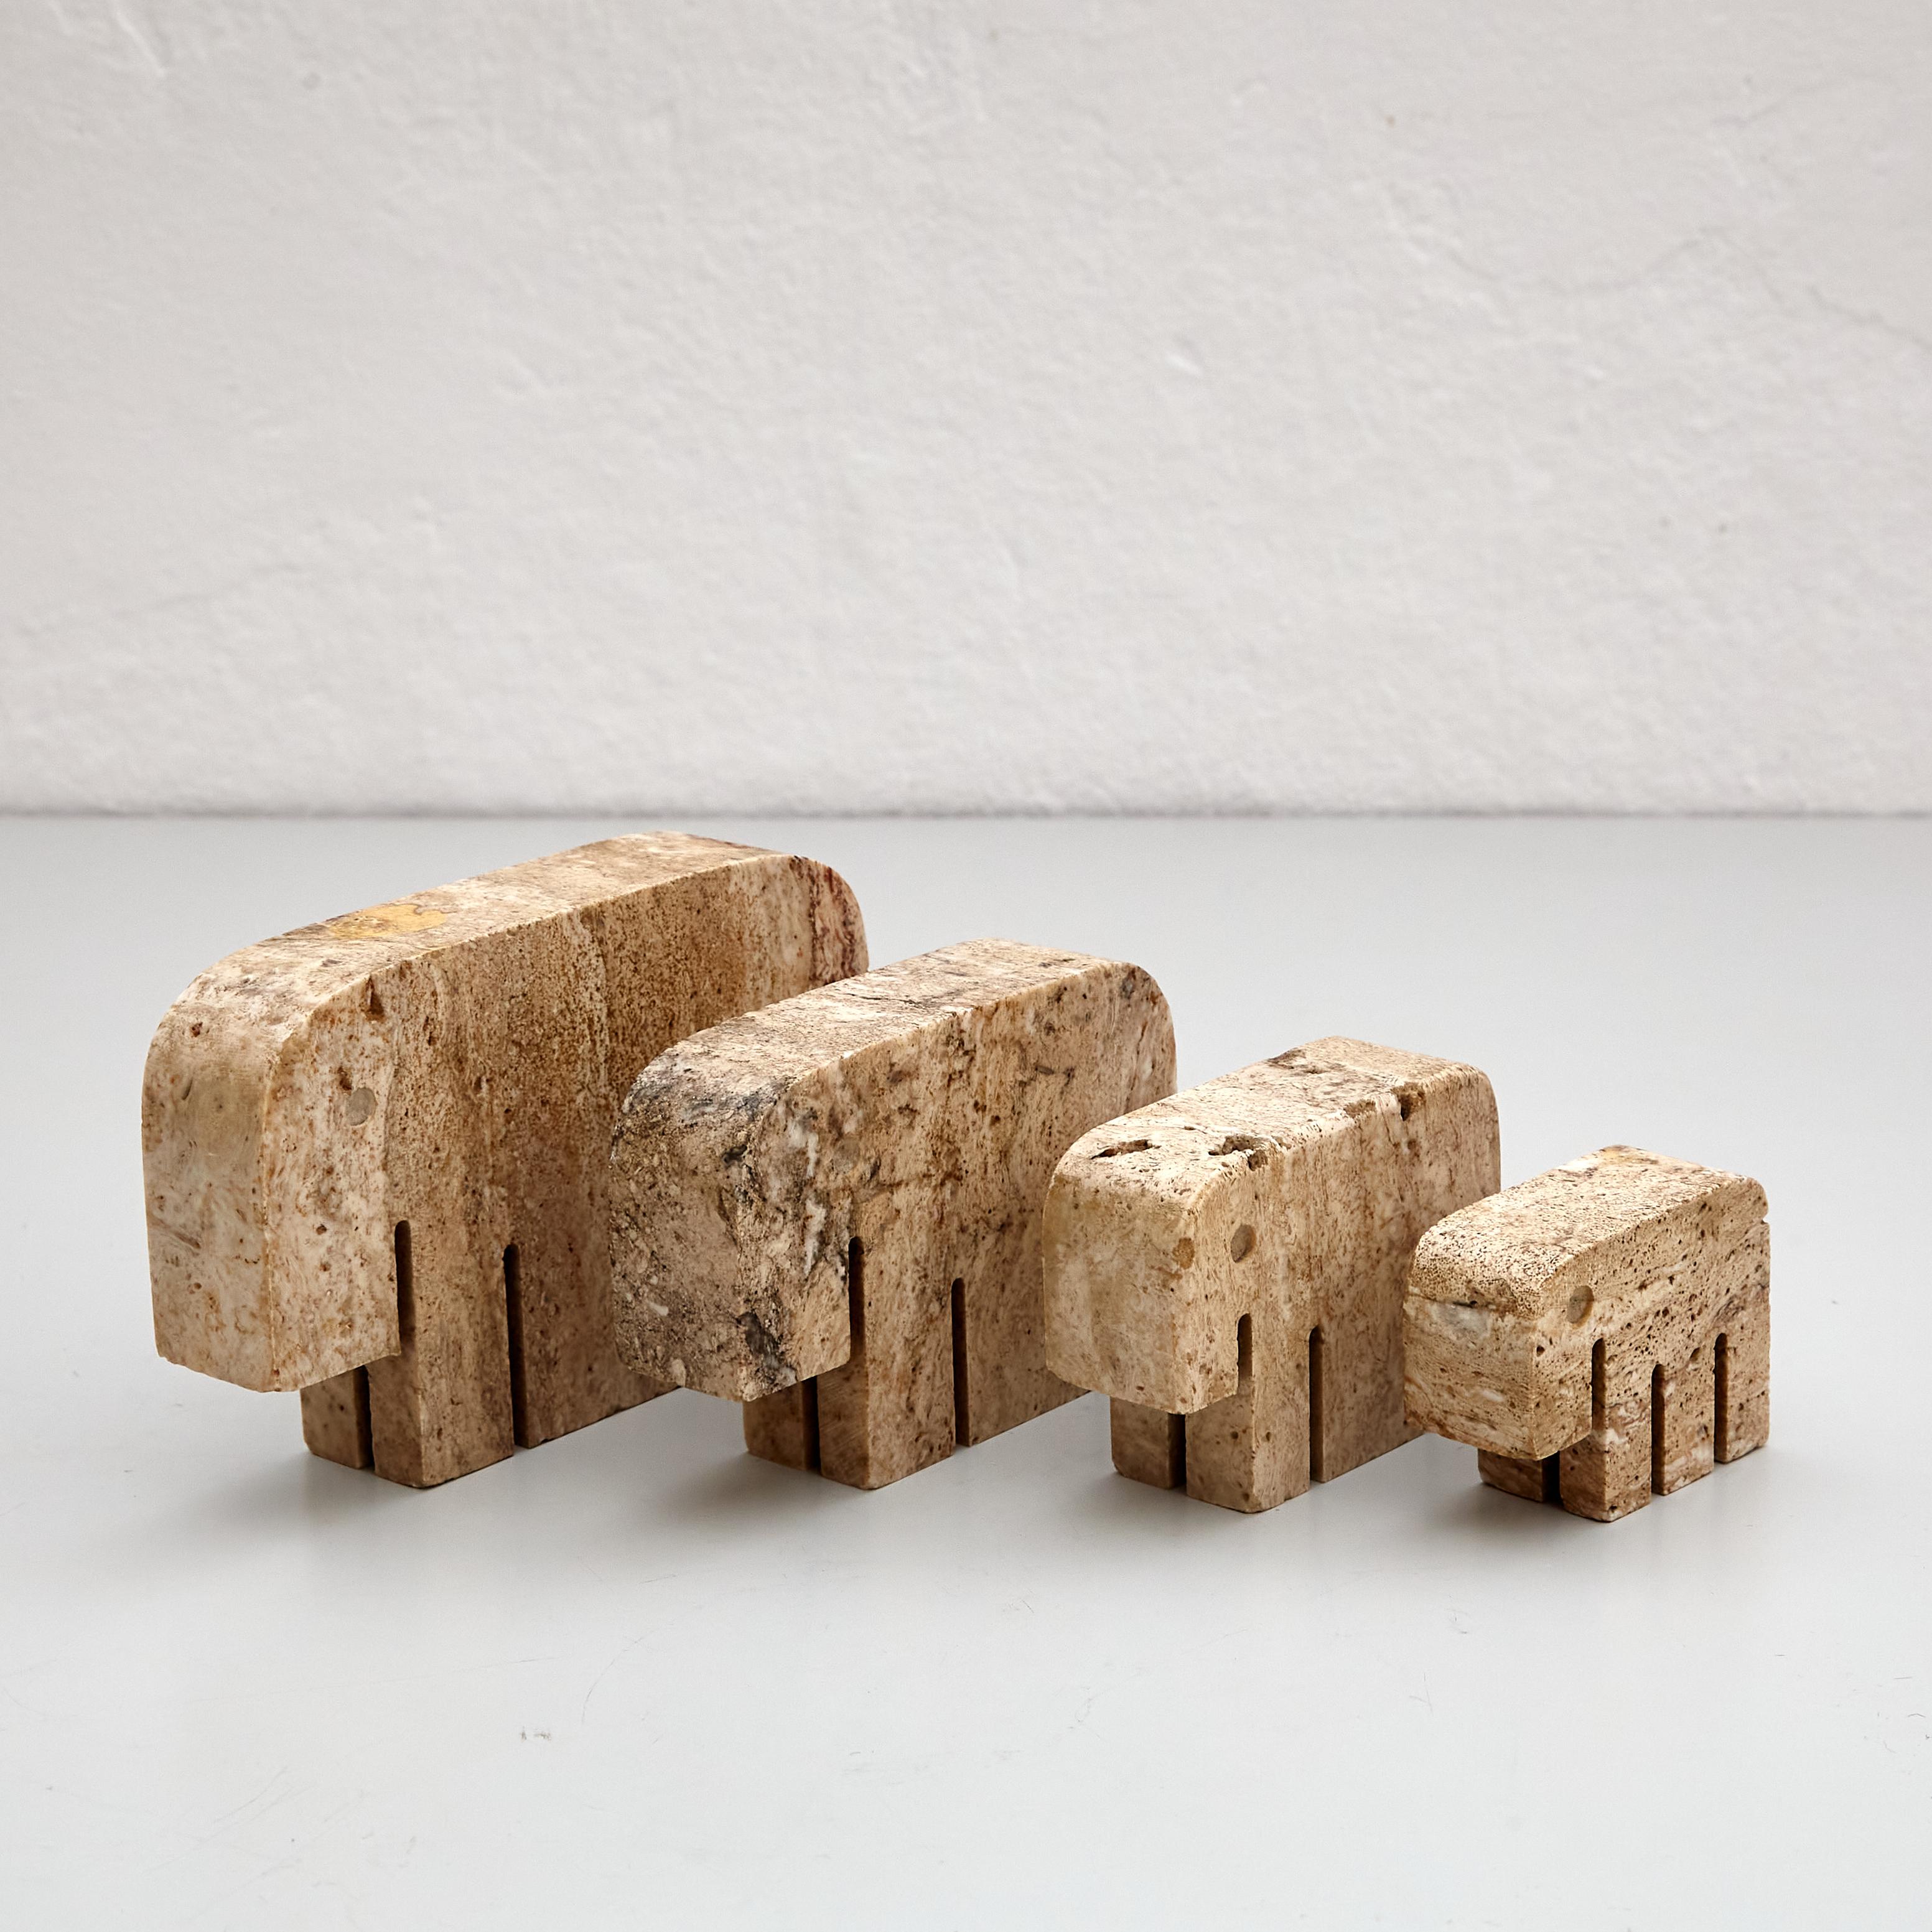 Set of 4 elephants sculpture travertine by Fratelli Mannelli

Manufactured in Italy, circa 1970.

In original condition with minor wear consistent of age and use, preserving a beautiful patina.

Materials: 
marble 

Dimensions: 
XL-D 3 cm